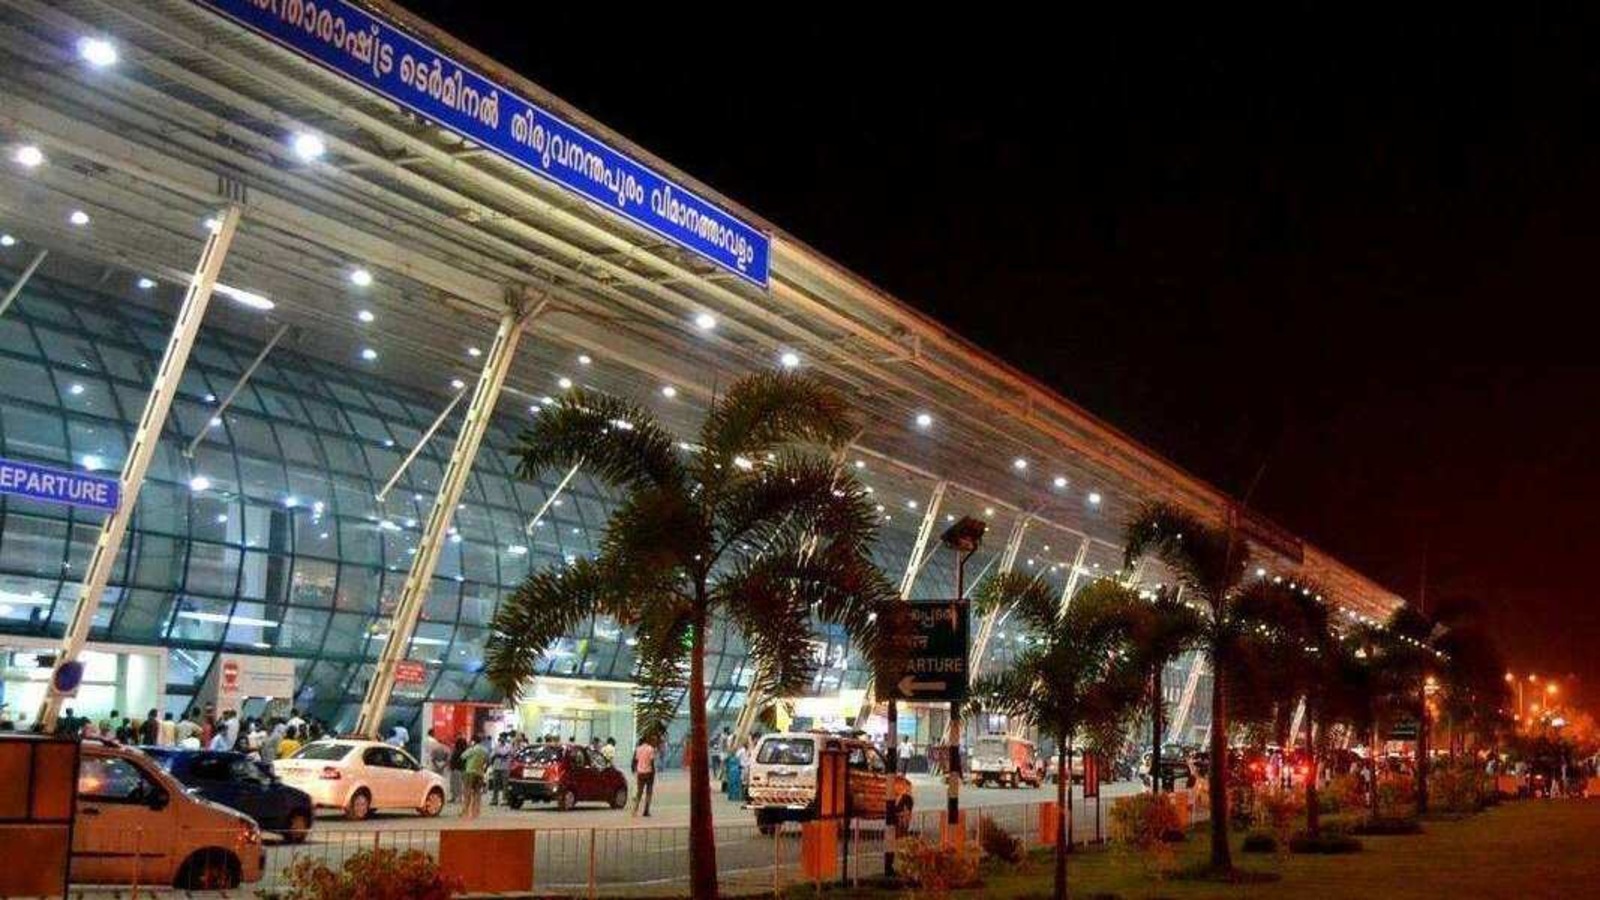 Employees protest at Trivandrum airport against takeover by Adani Group | Latest News India - Hindustan Times